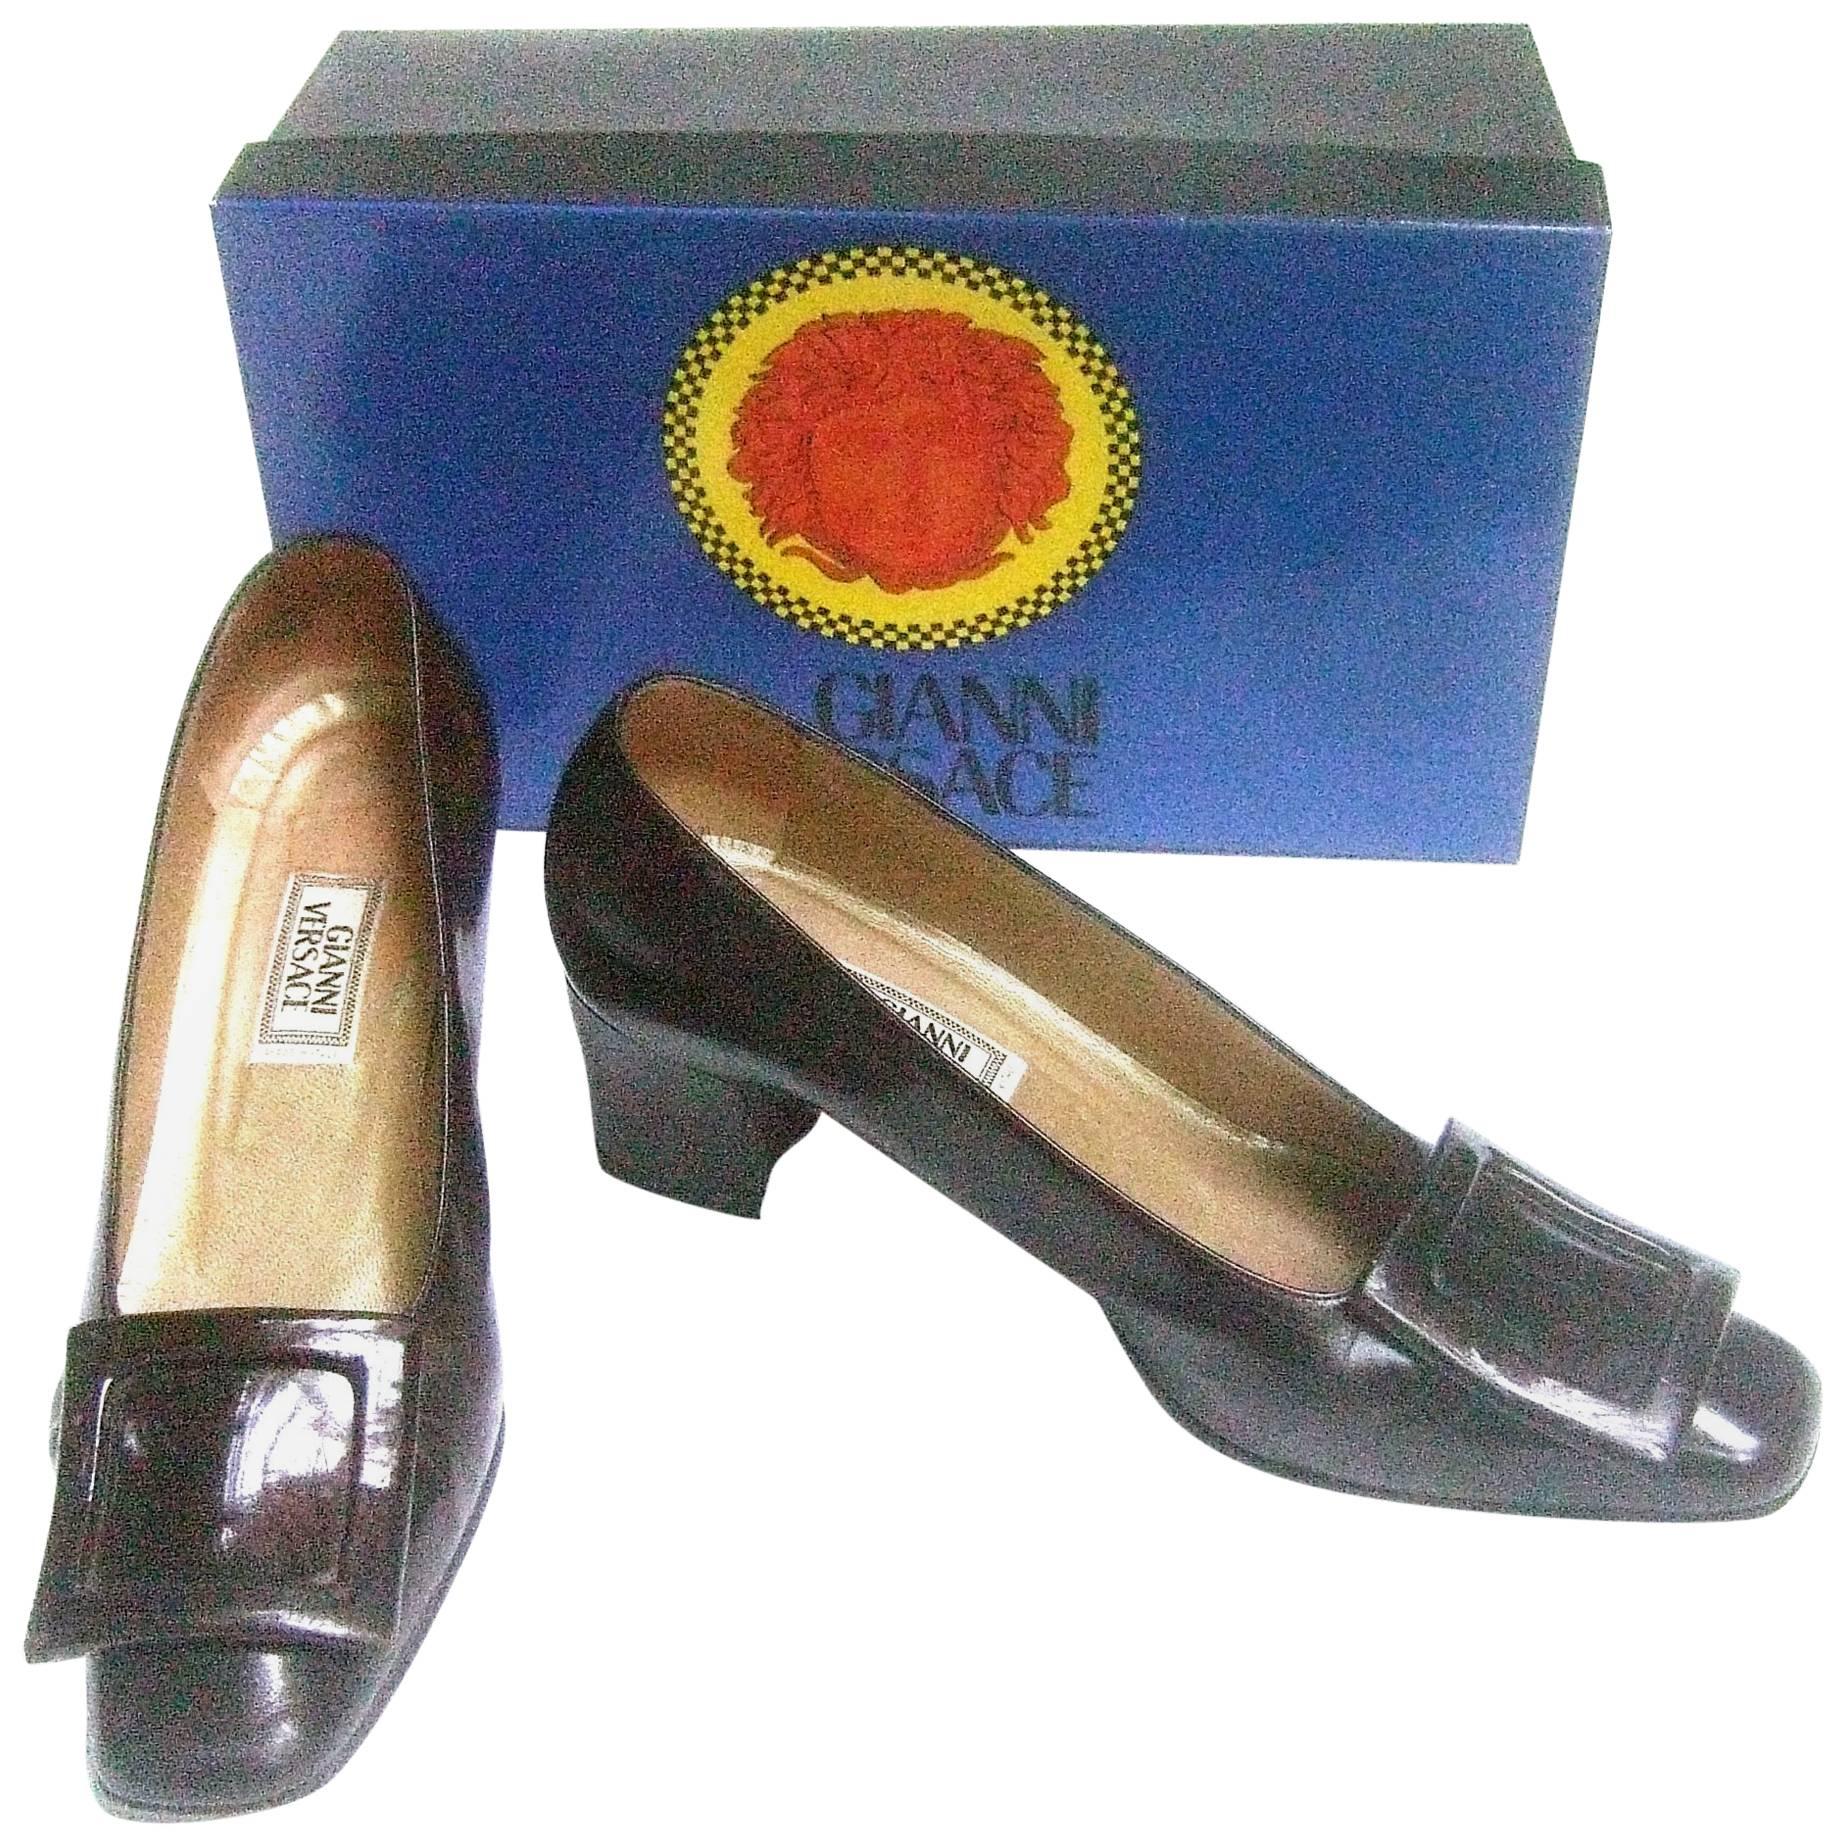 Versace Chocolate Brown Leather Pumps in Versace Box Size 39 c 1990 For Sale